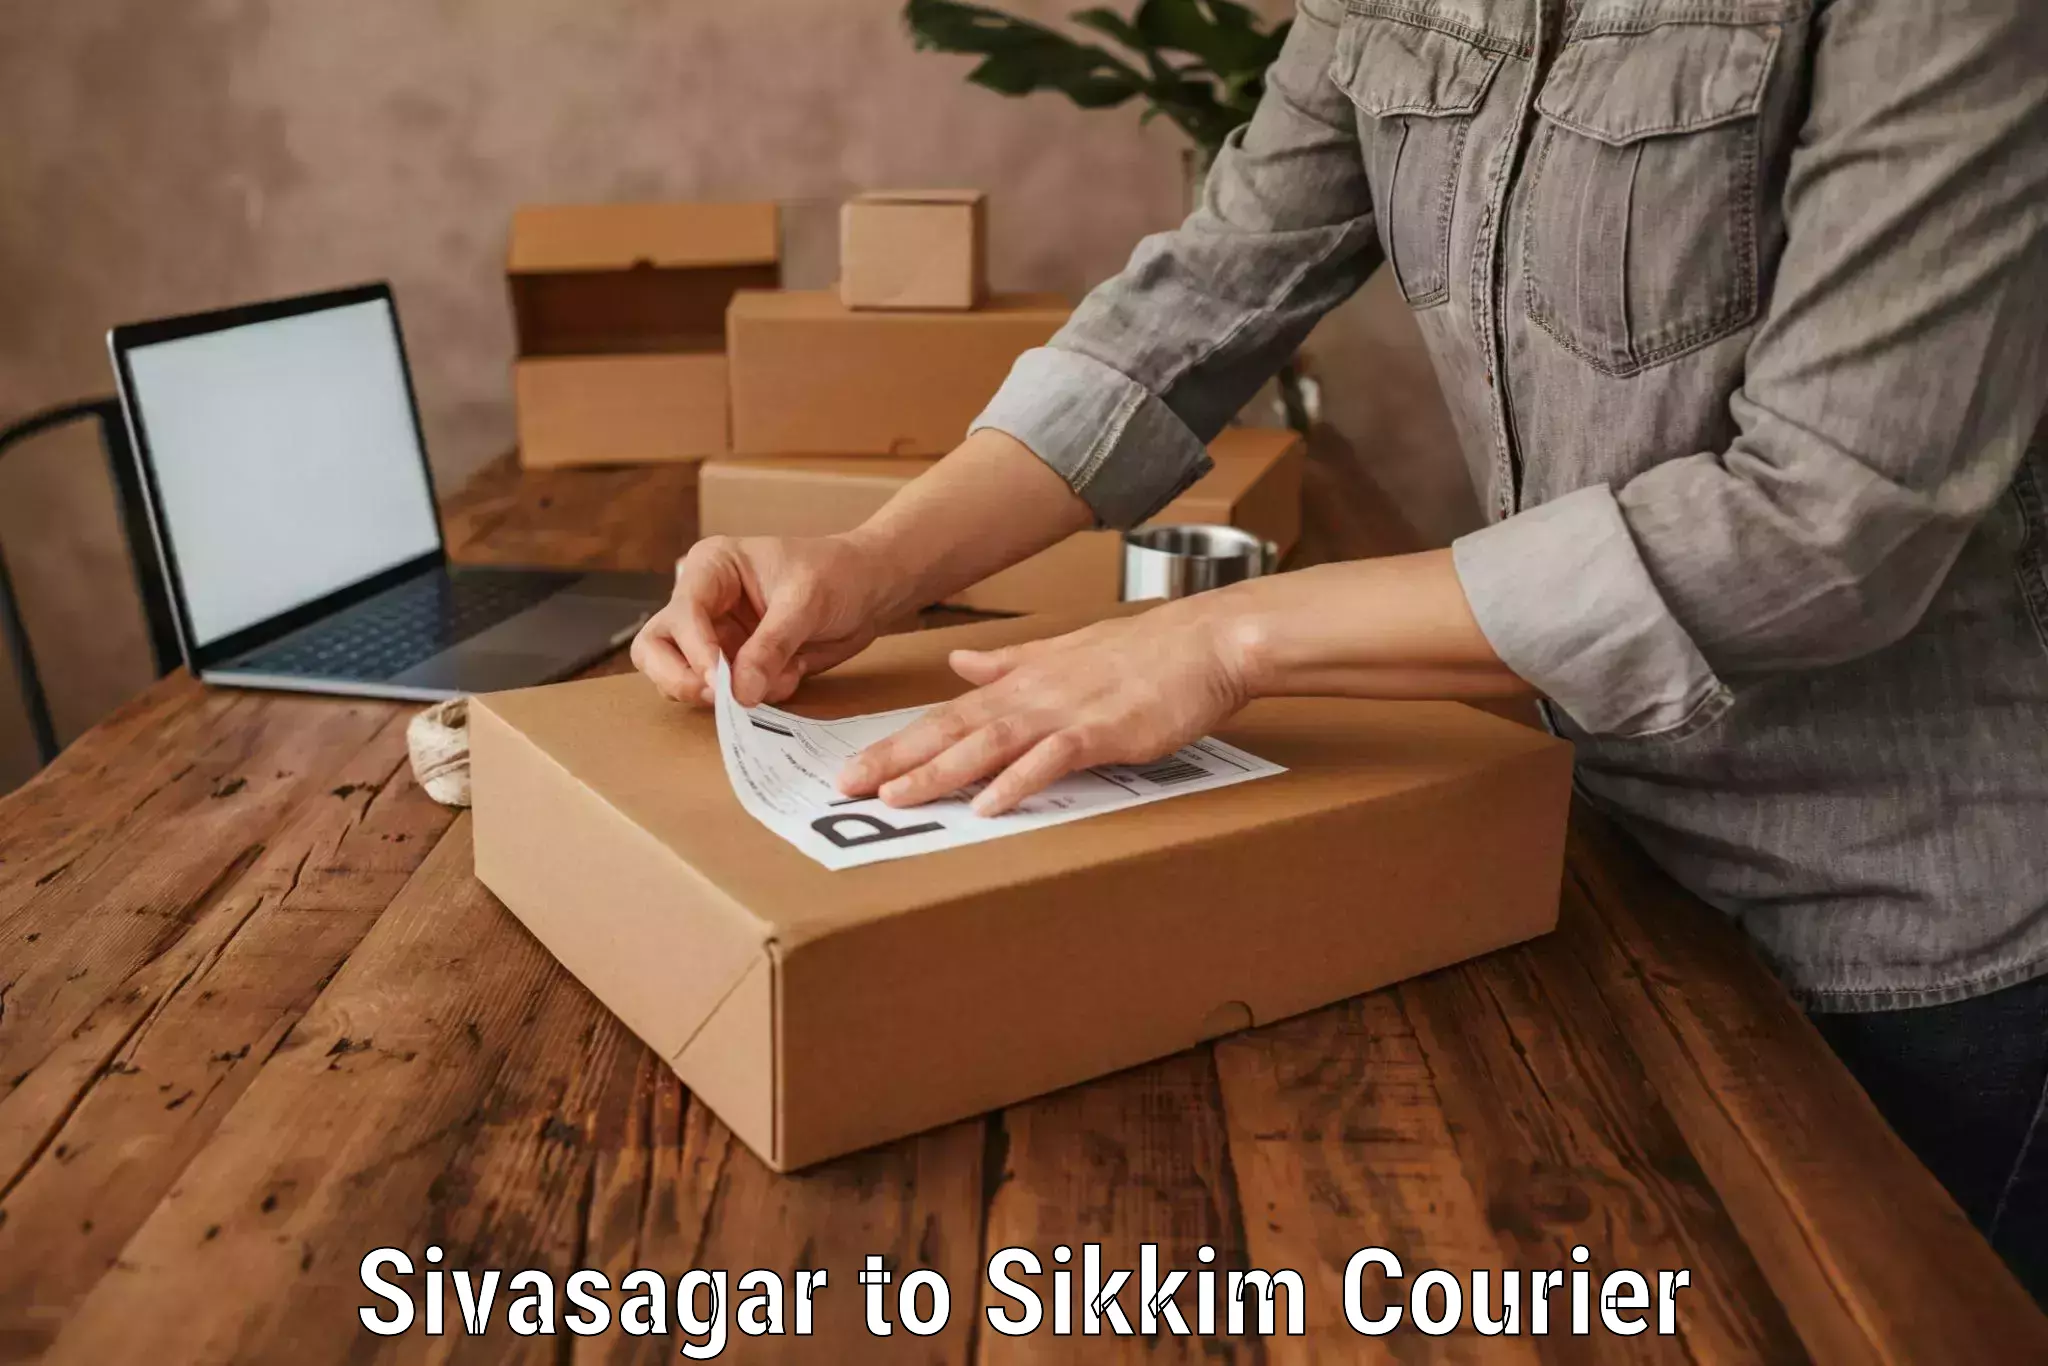 Hassle-free luggage shipping Sivasagar to East Sikkim